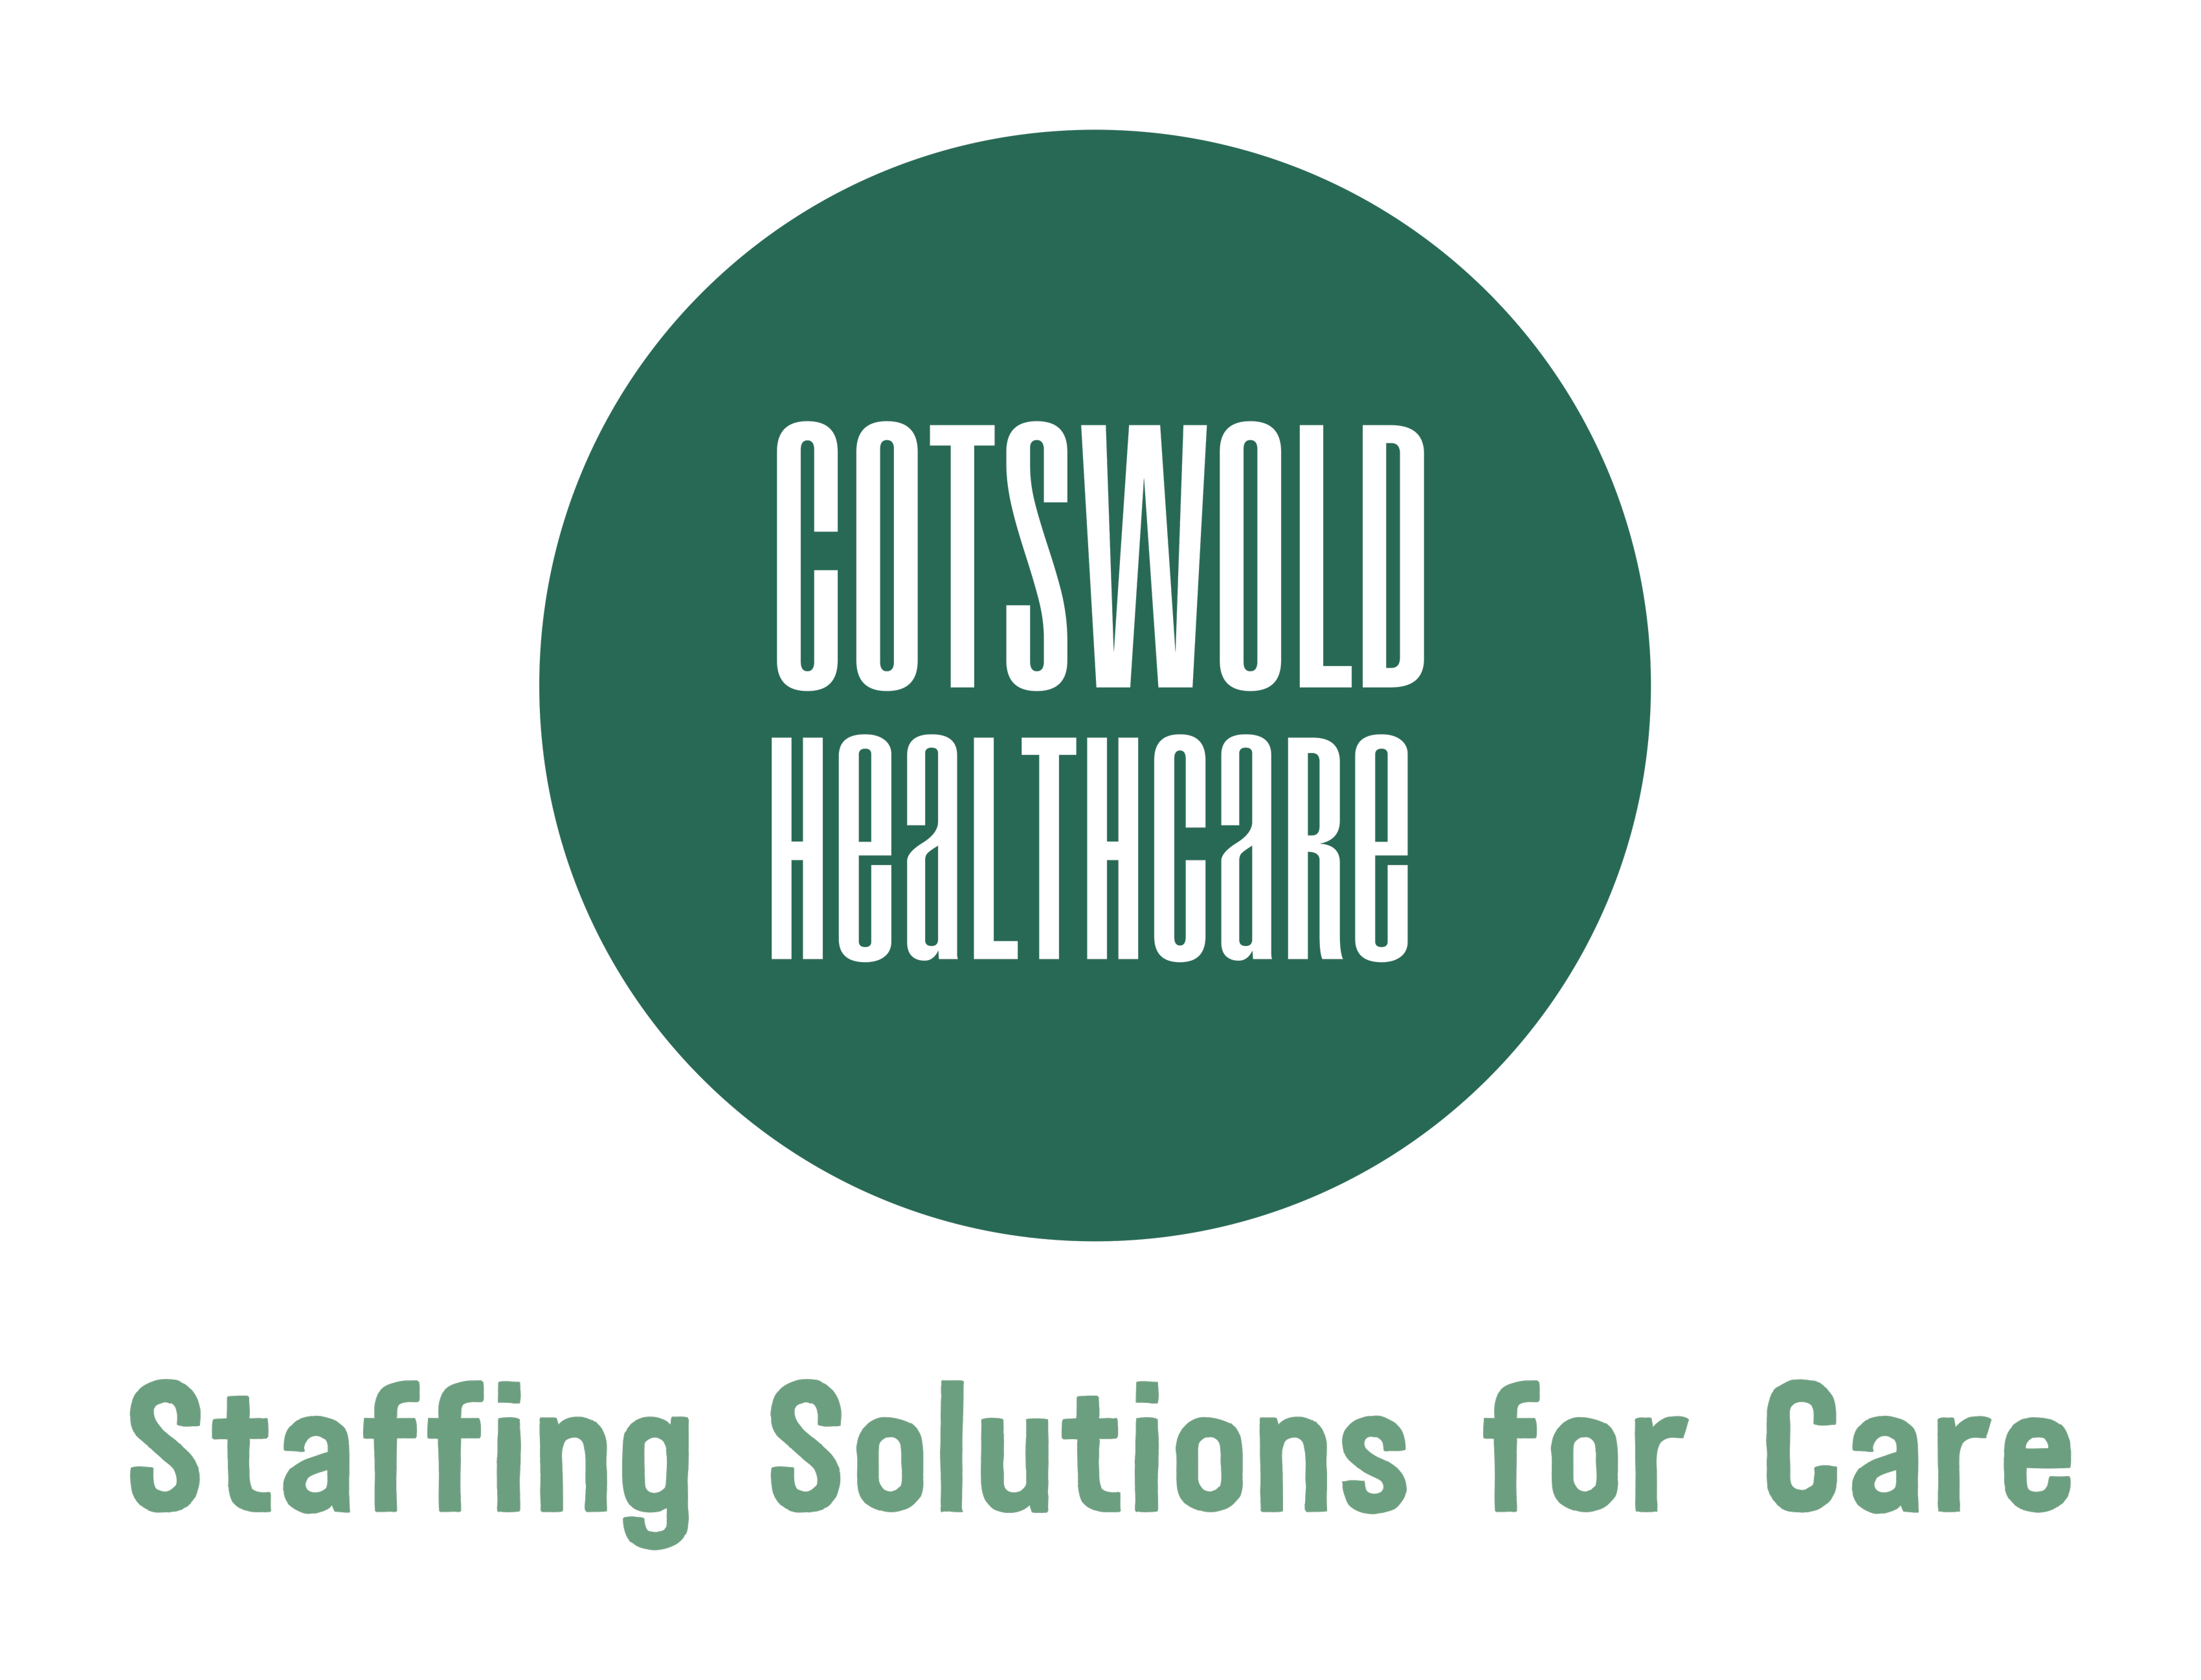 Cotswold Healthcare